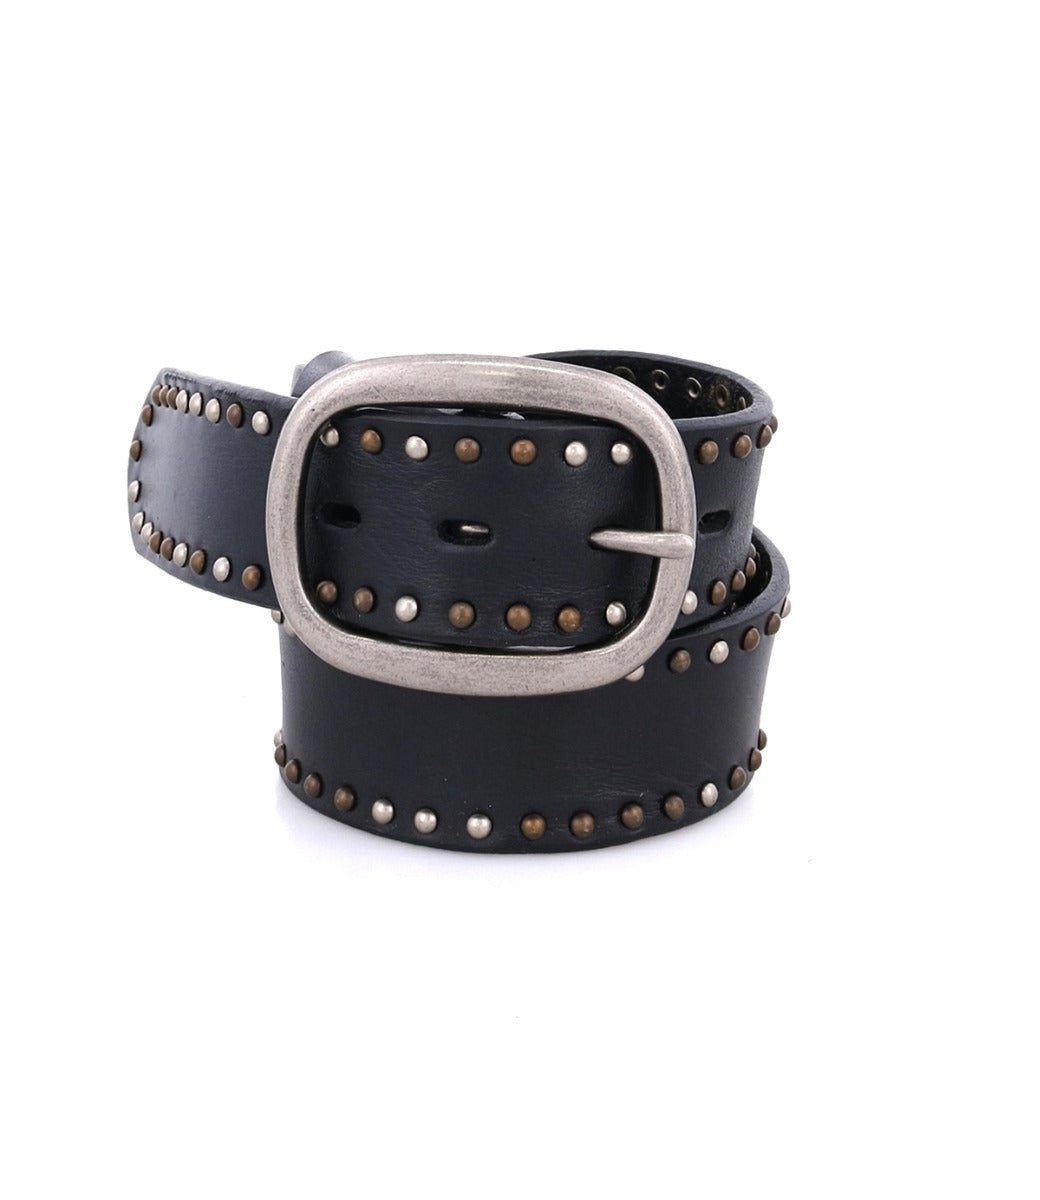 A Bed Stu Staple black leather belt with studding and a silver buckle.